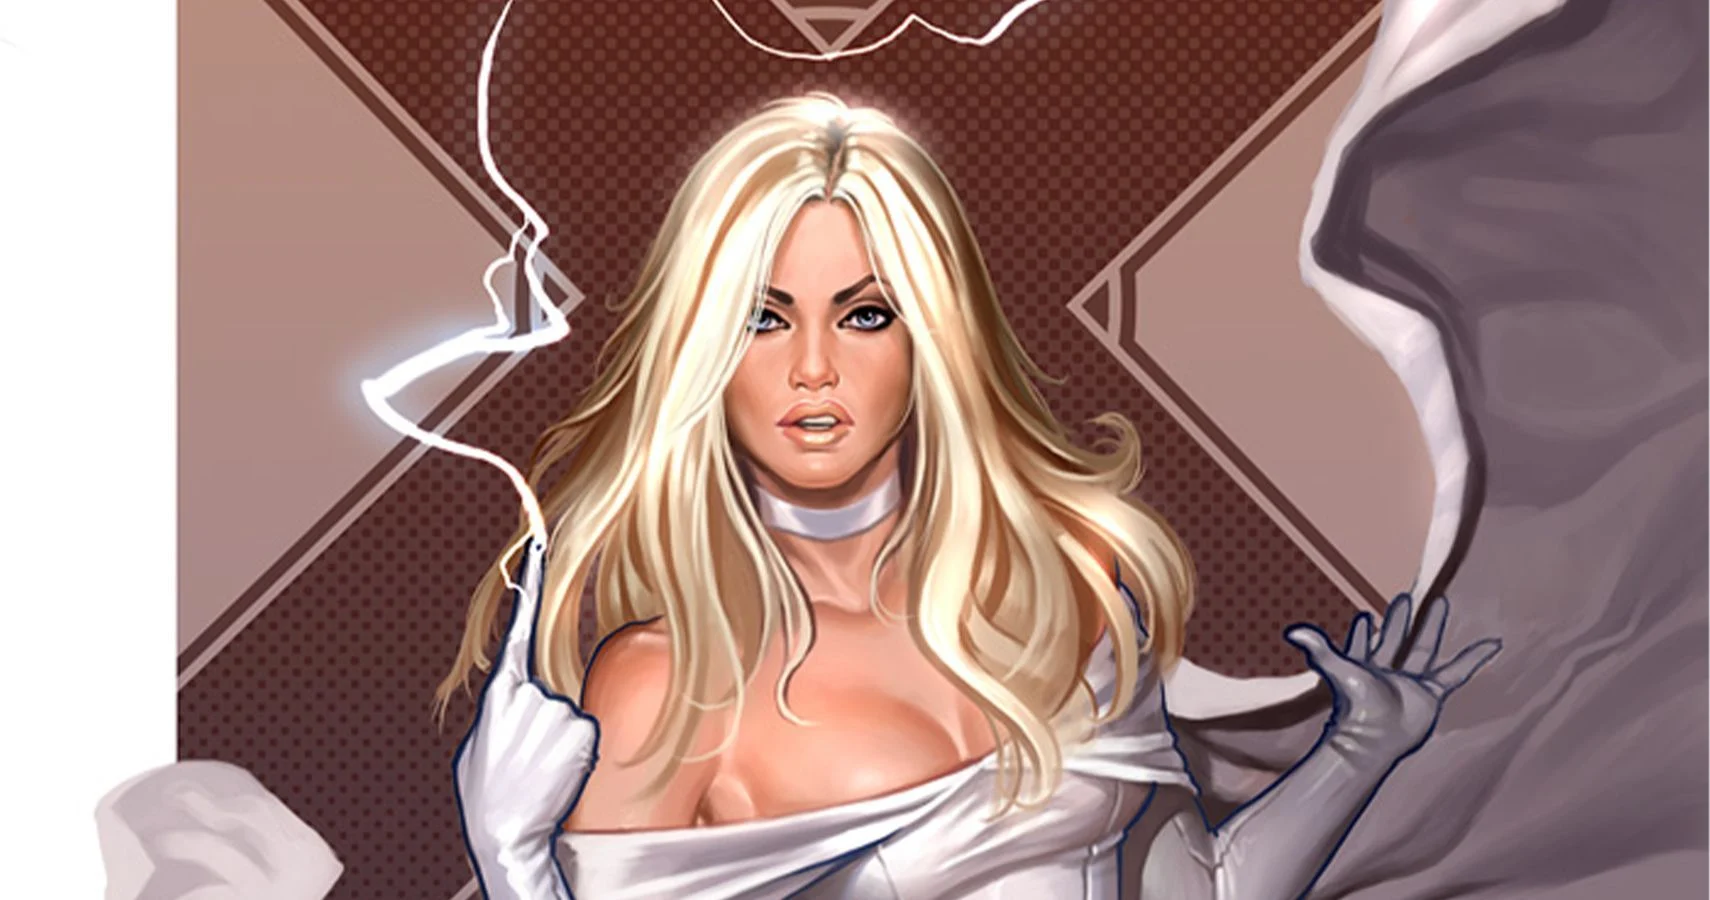 strongest female marvel characters: Emma Frost